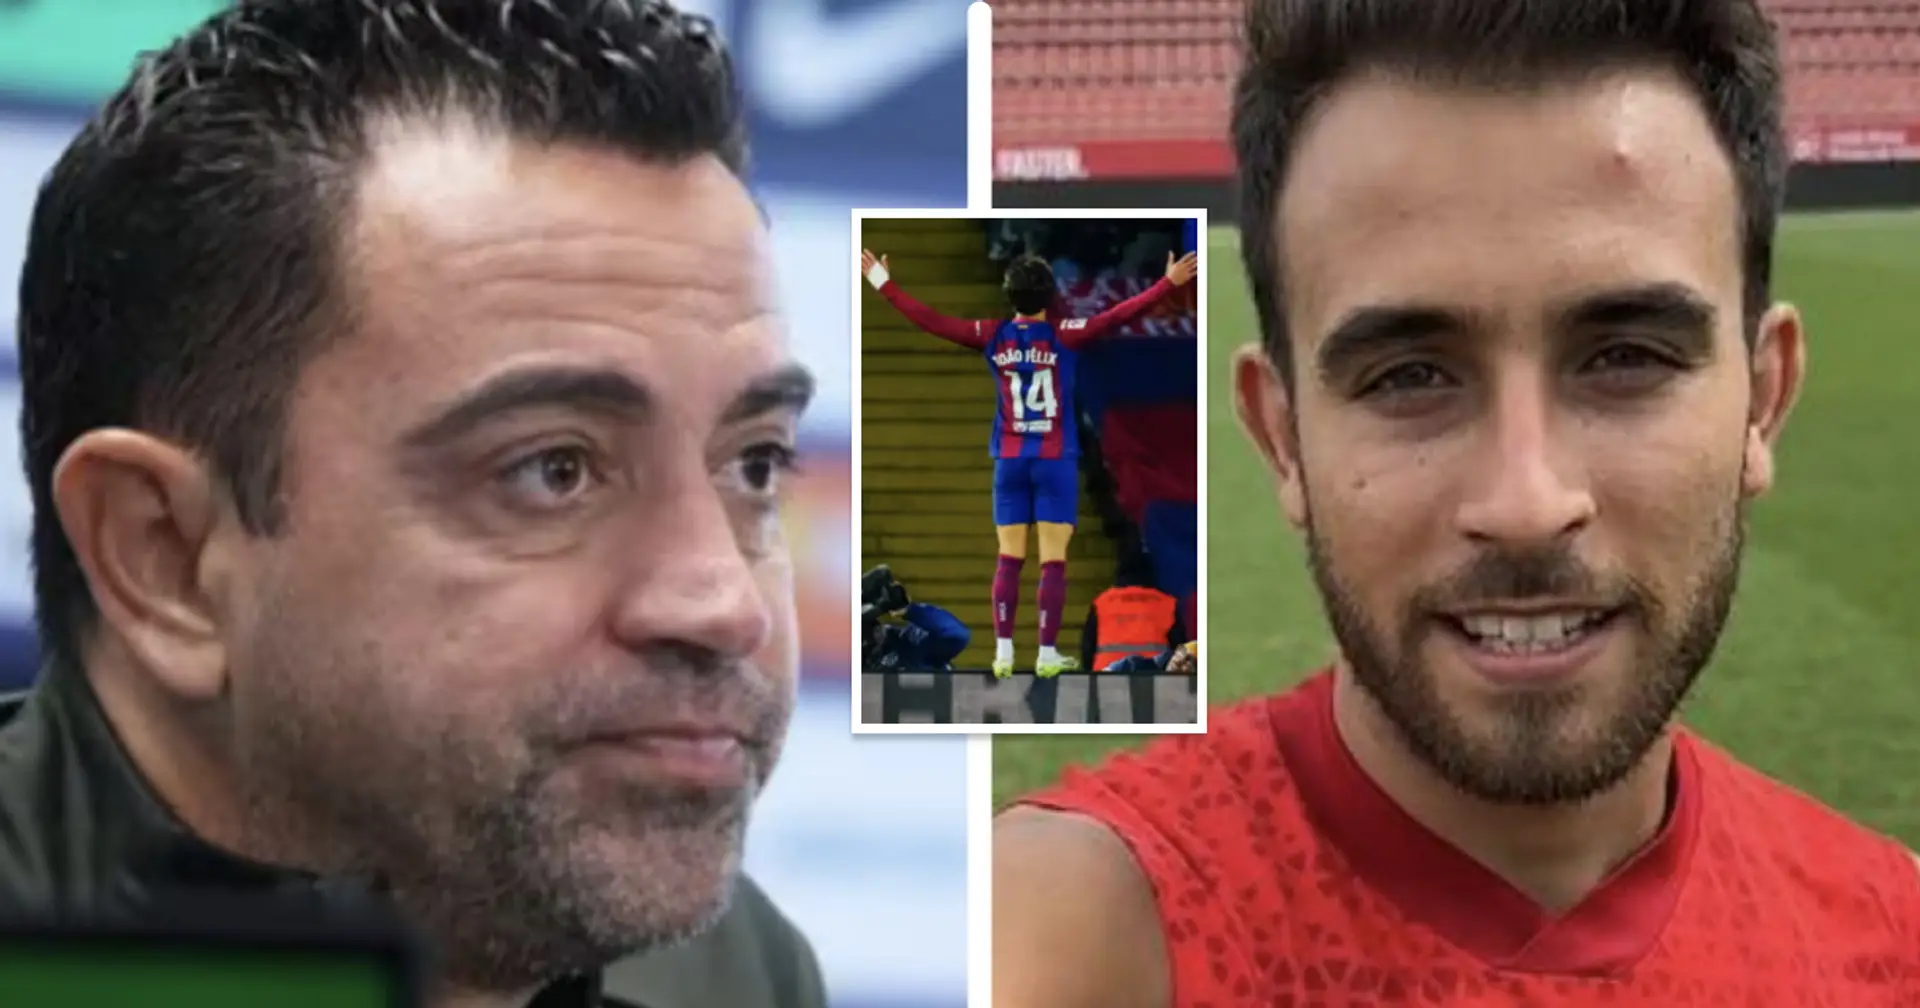 'Look at Atletico – their own player screwed them': Xavi unhappy Eric Garcia will play against Barca